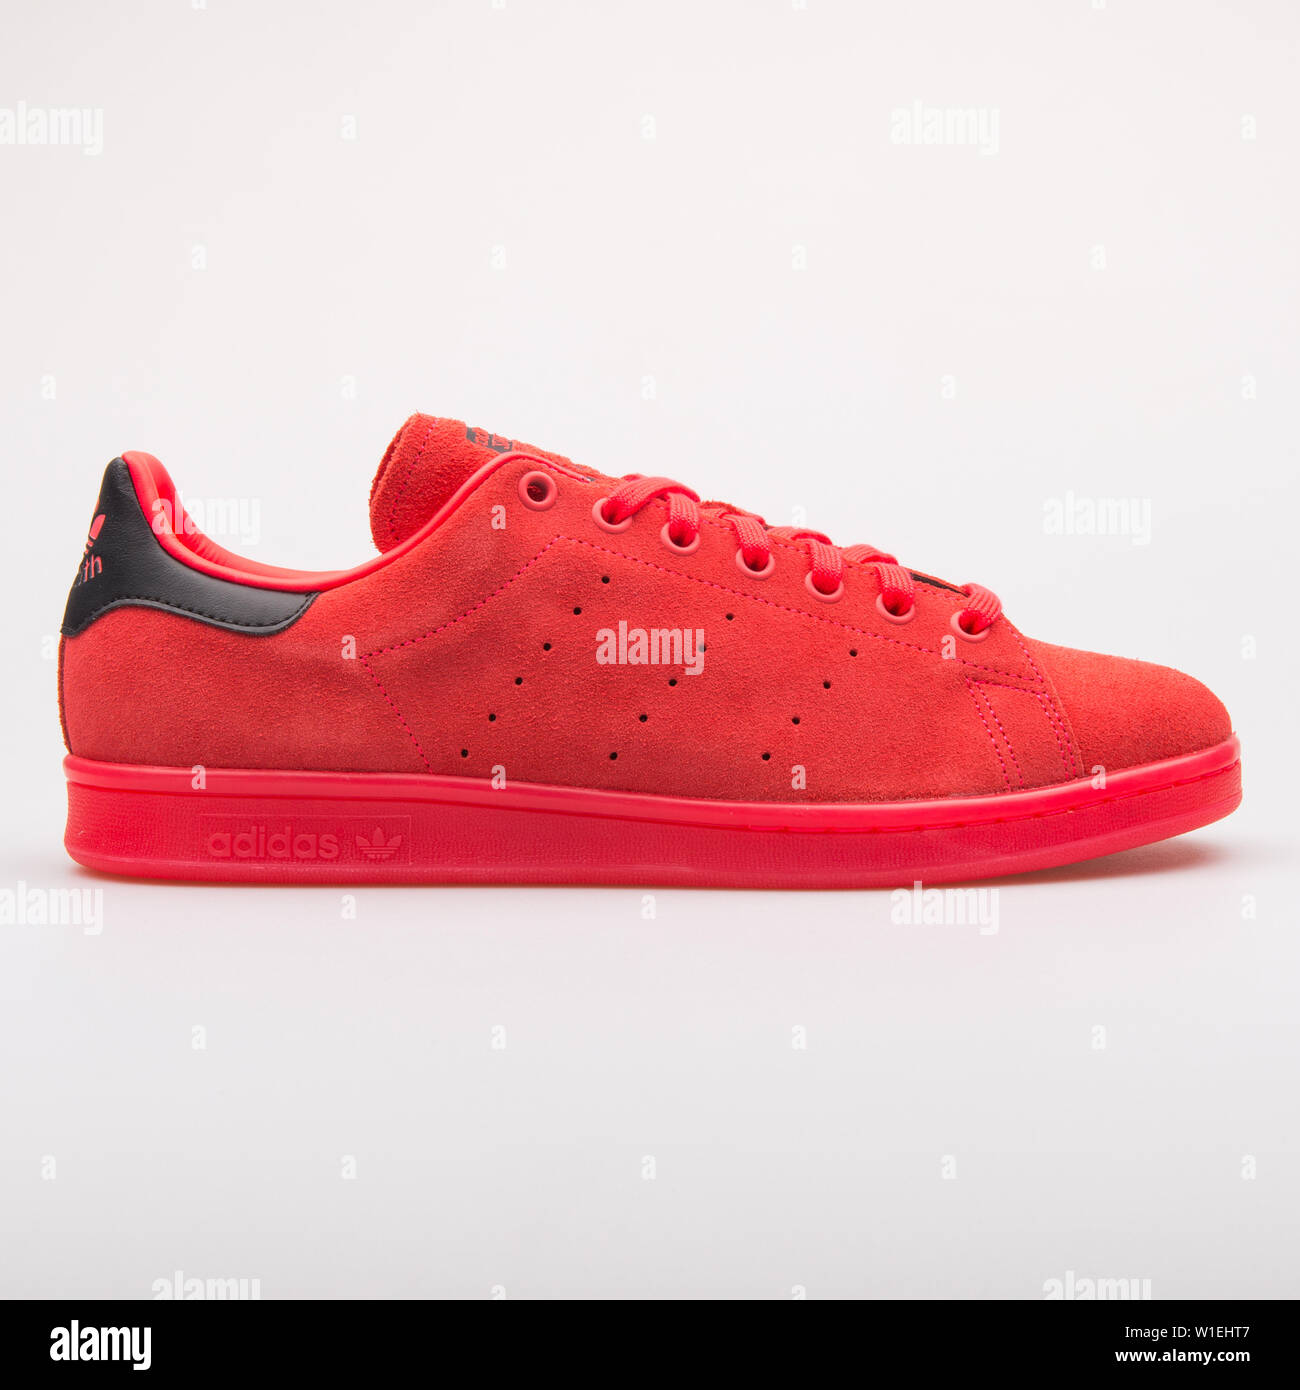 adidas stan smith pas cher images, Arvind Sport